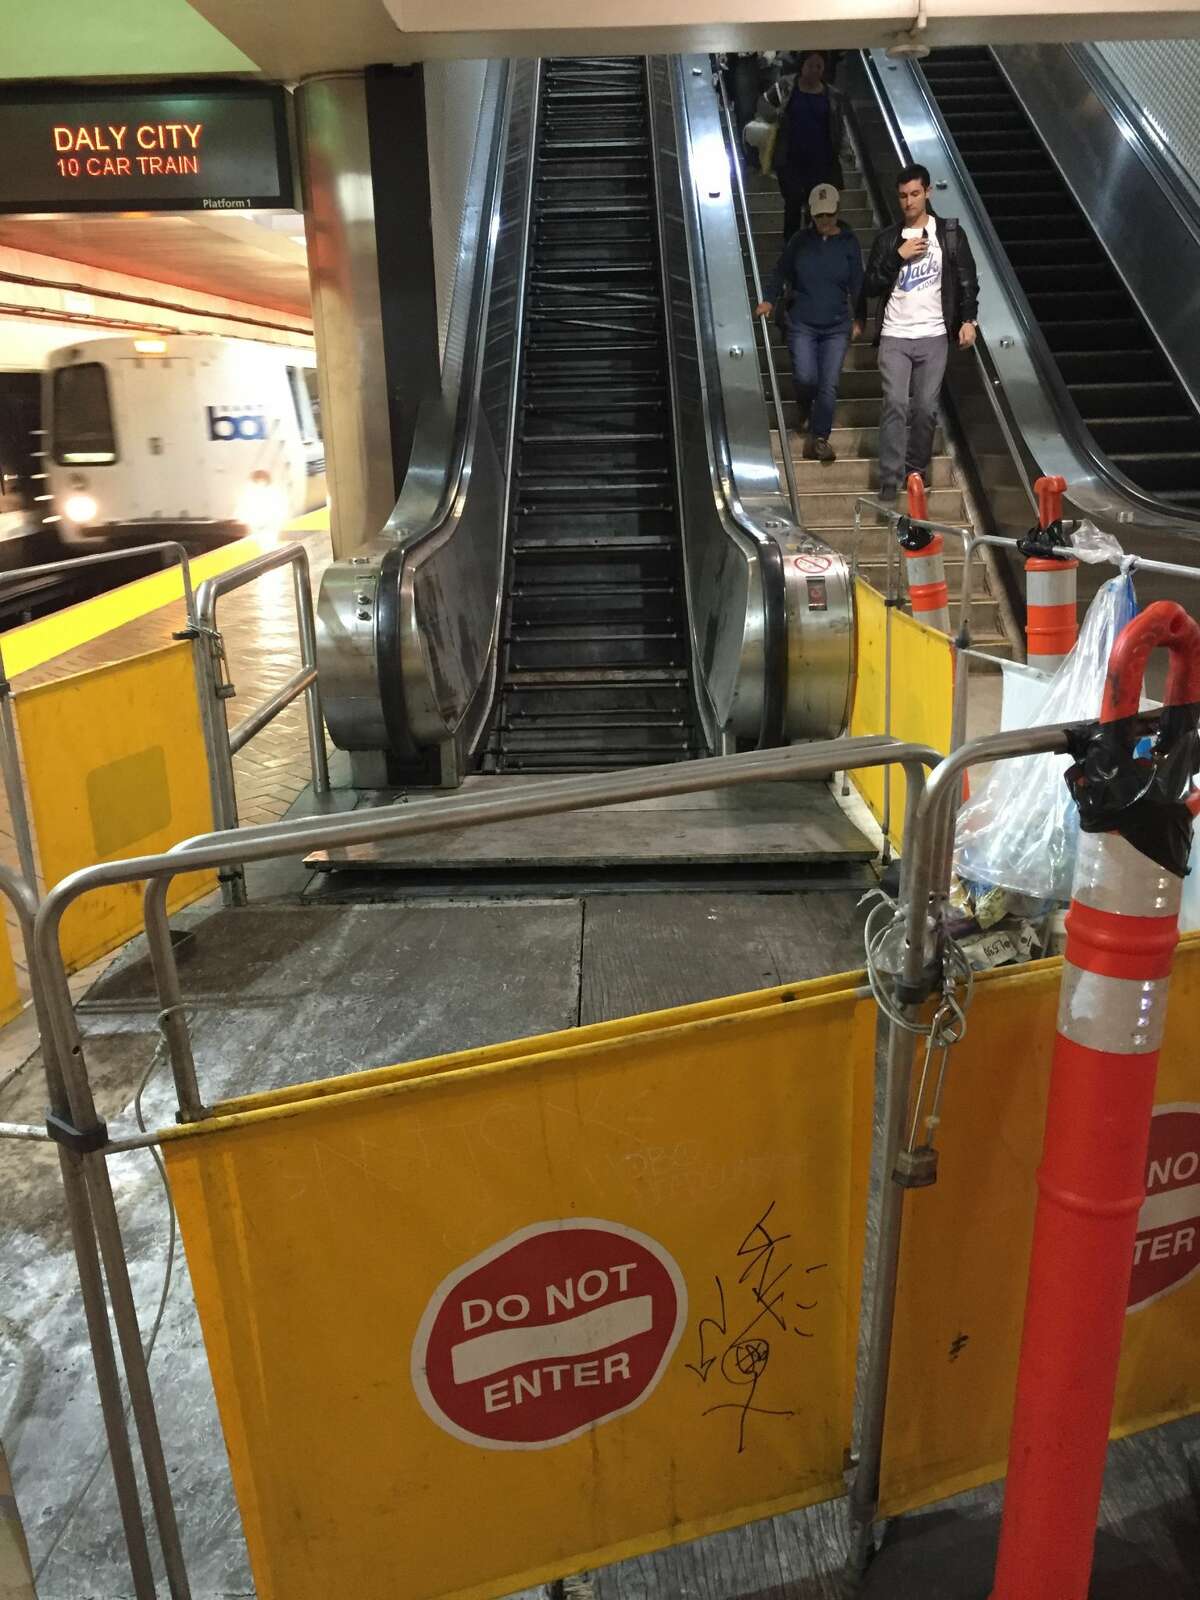 A view of the ripped-out escalator.